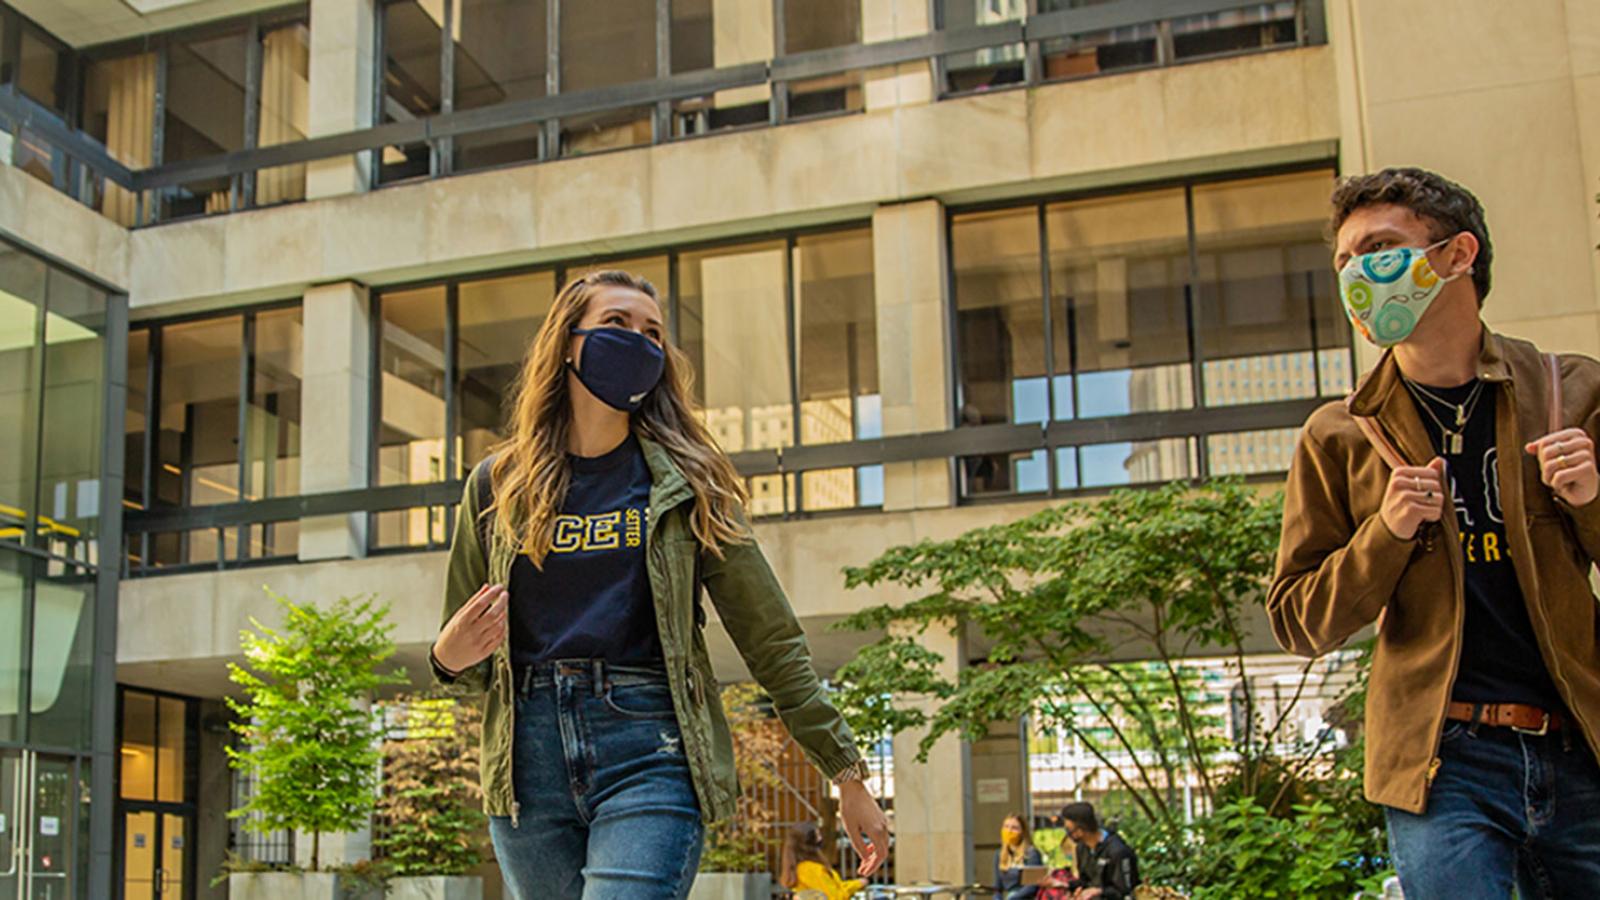 Students walking around the NYC campus wearing masks